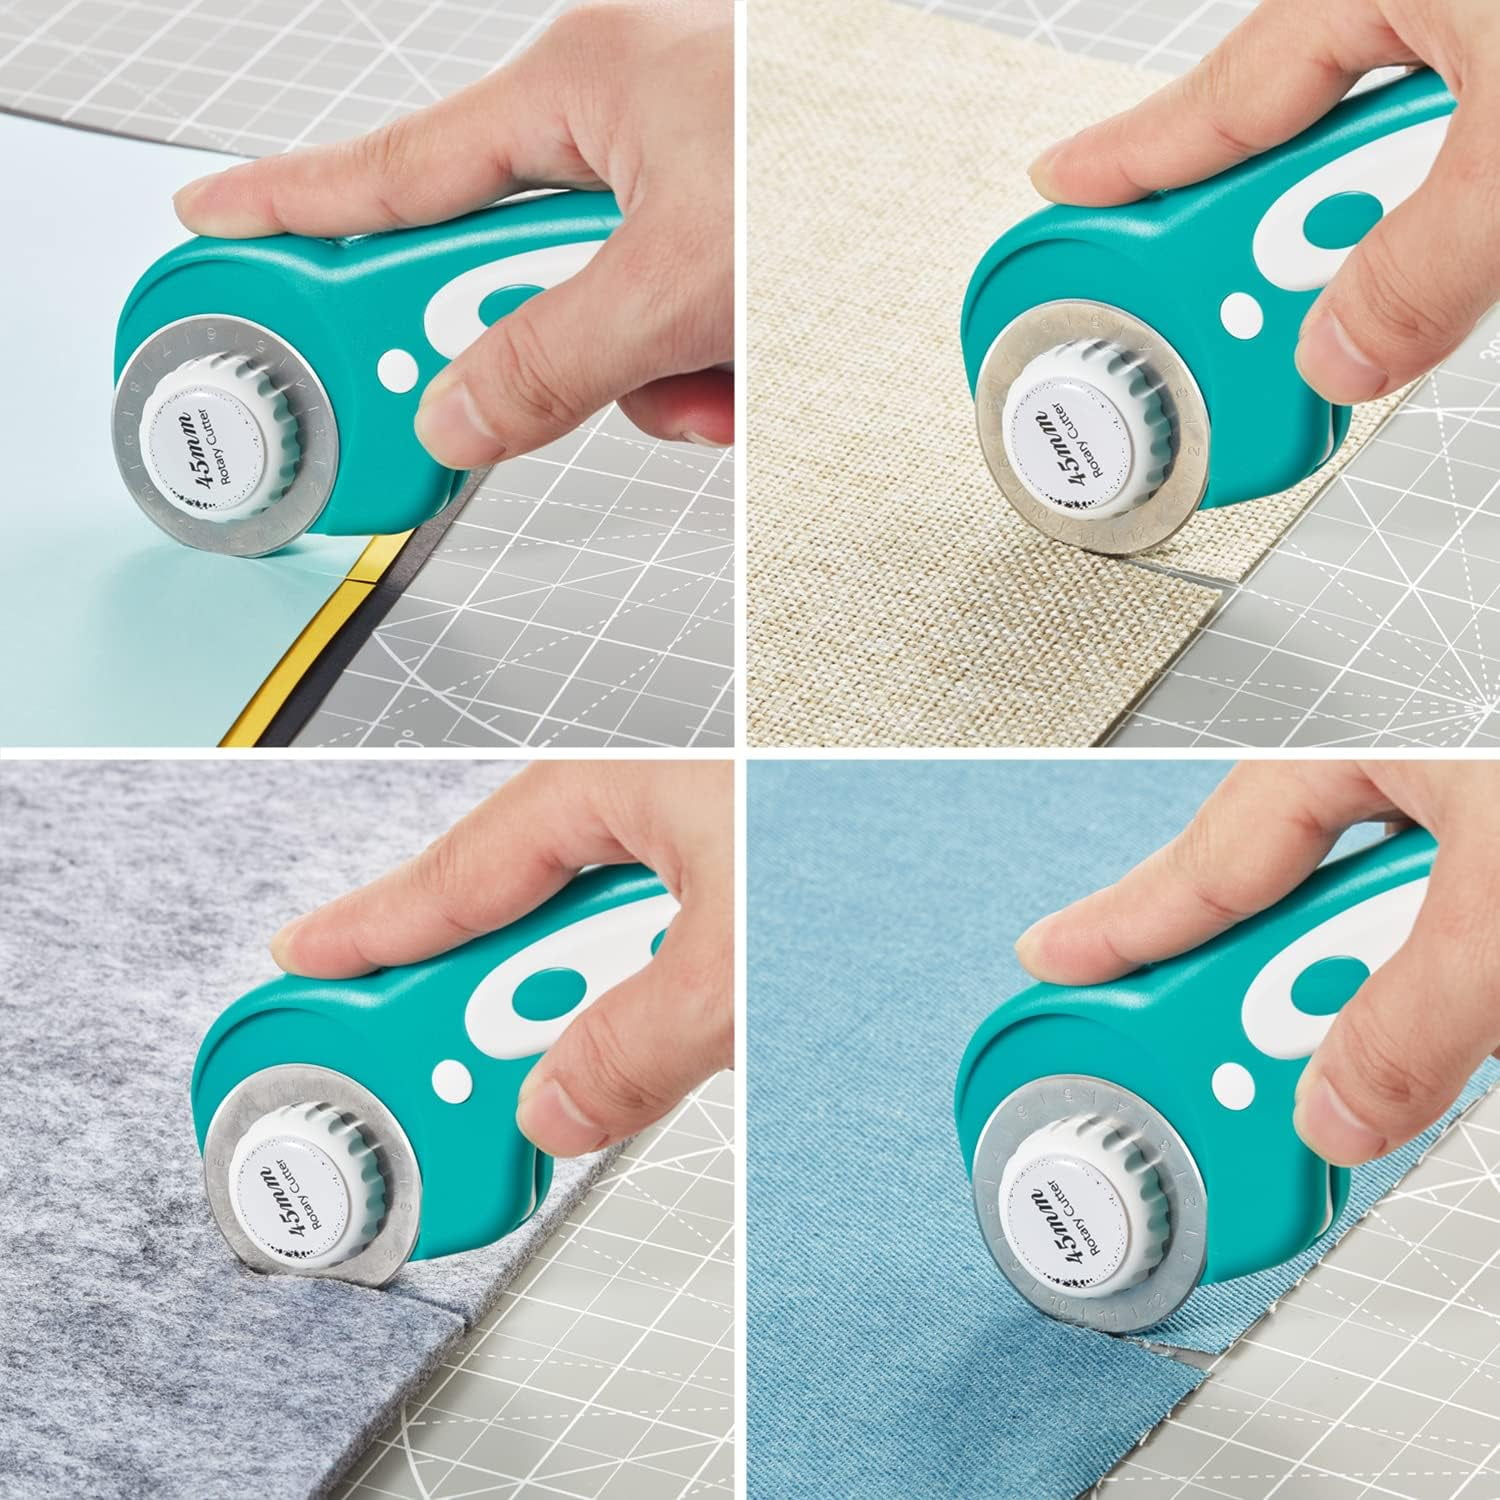 Headley Tools 45mm Rotary Cutter for Fabric, Ergonomic Handle